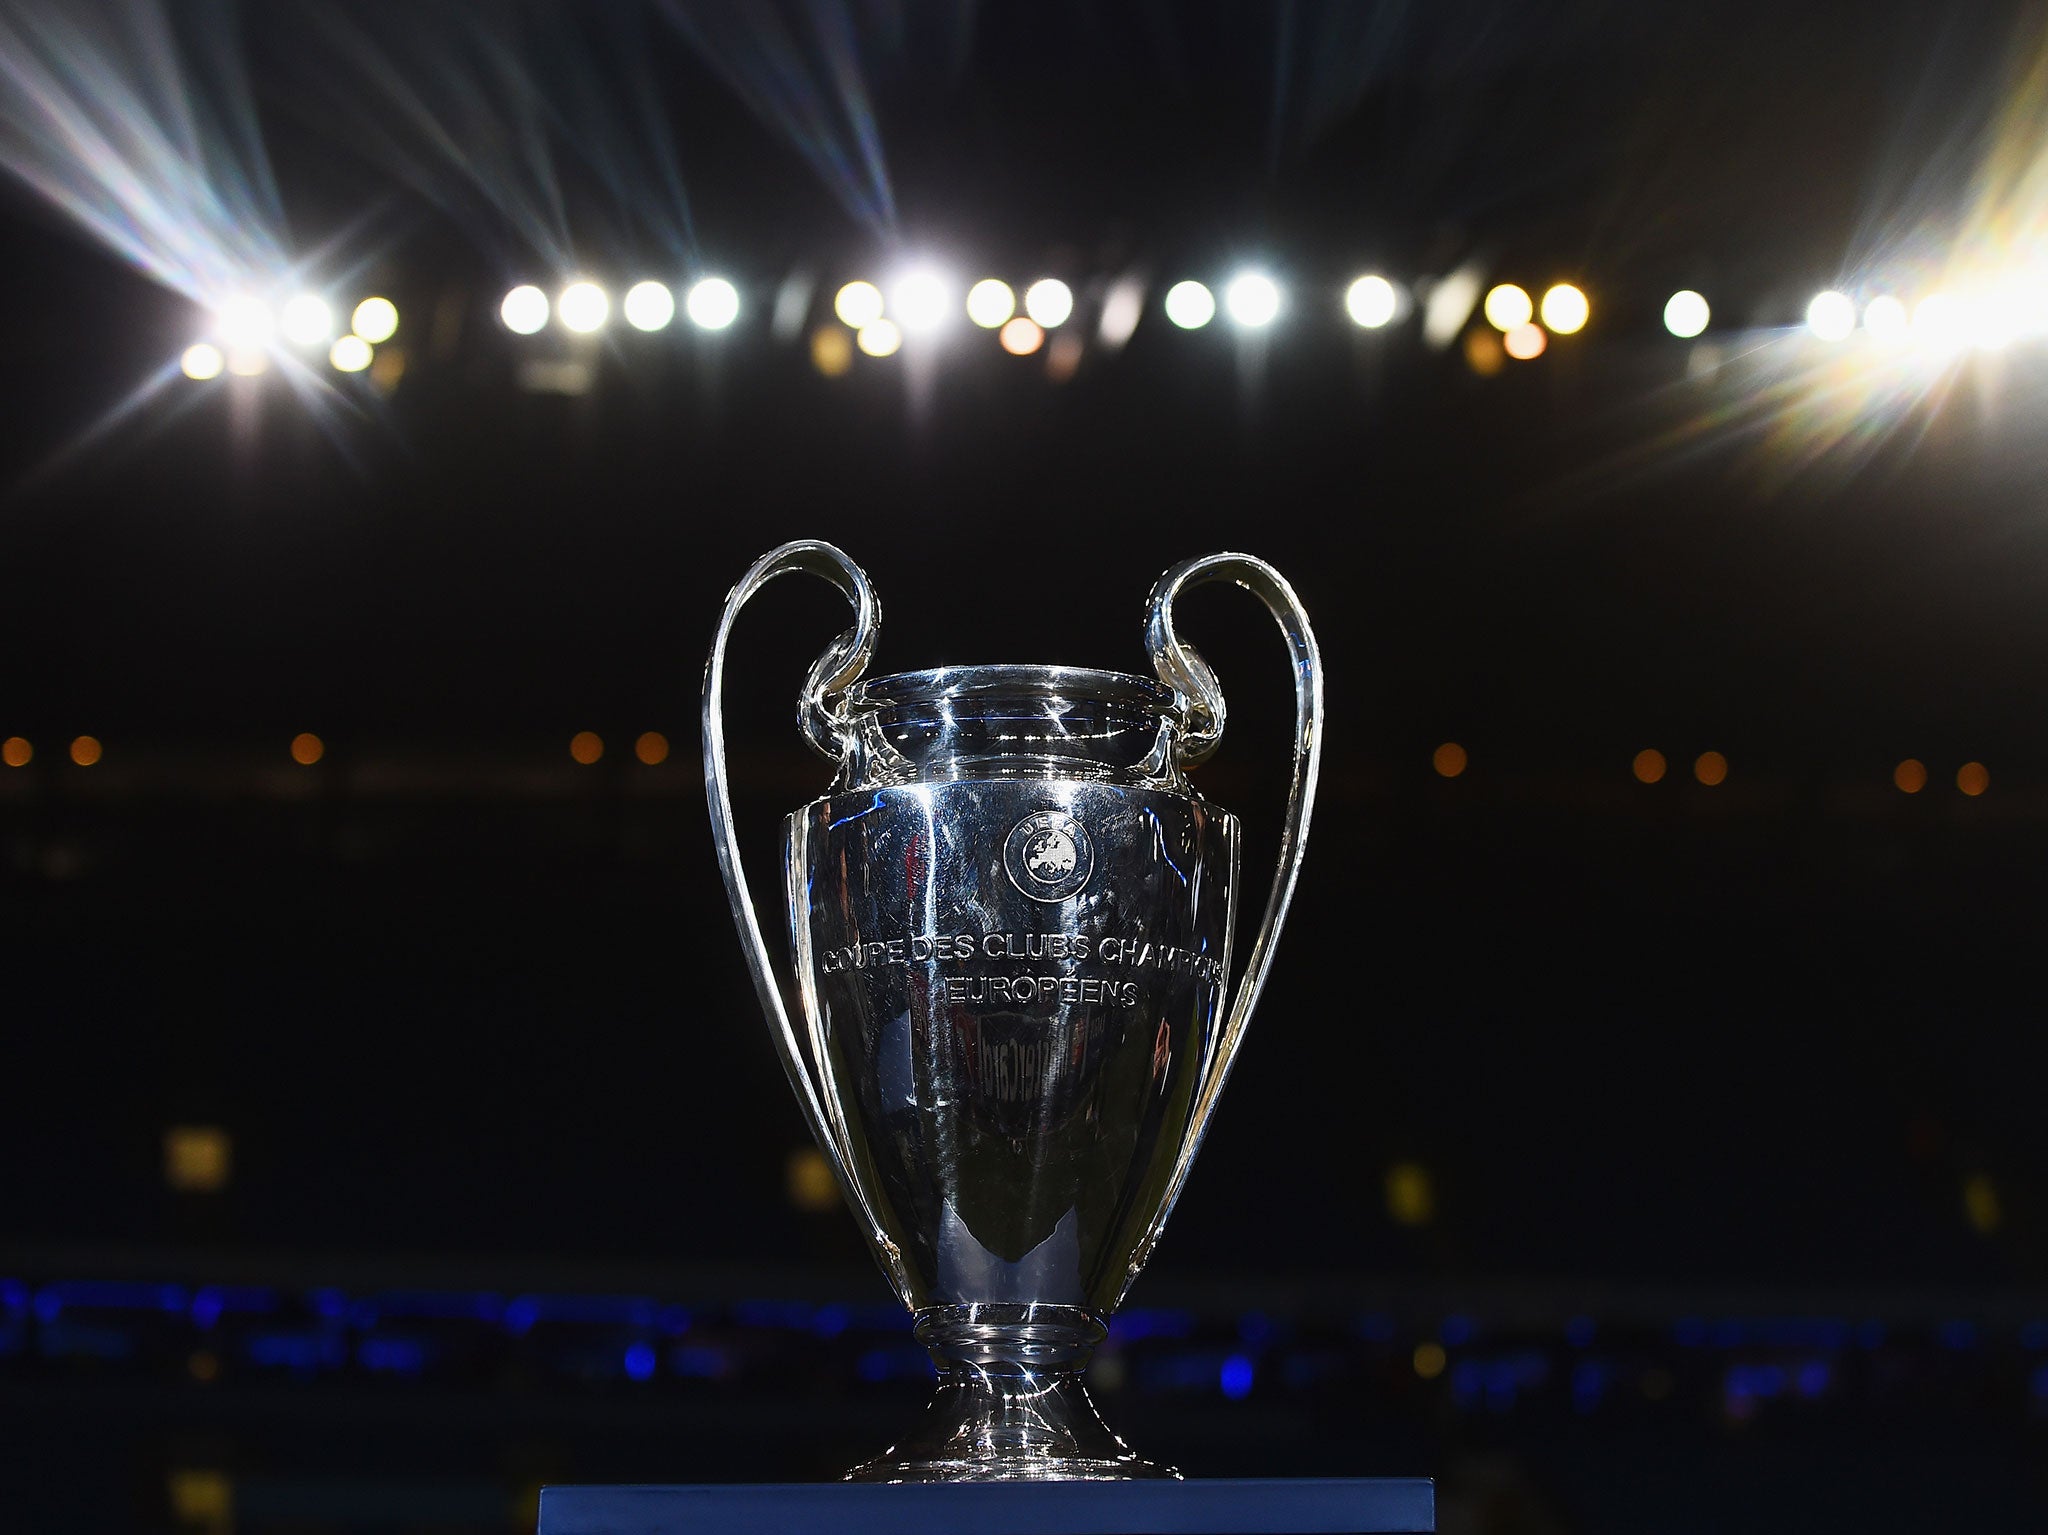 The Champions League final will be played in Cardiff at the Principality Stadium